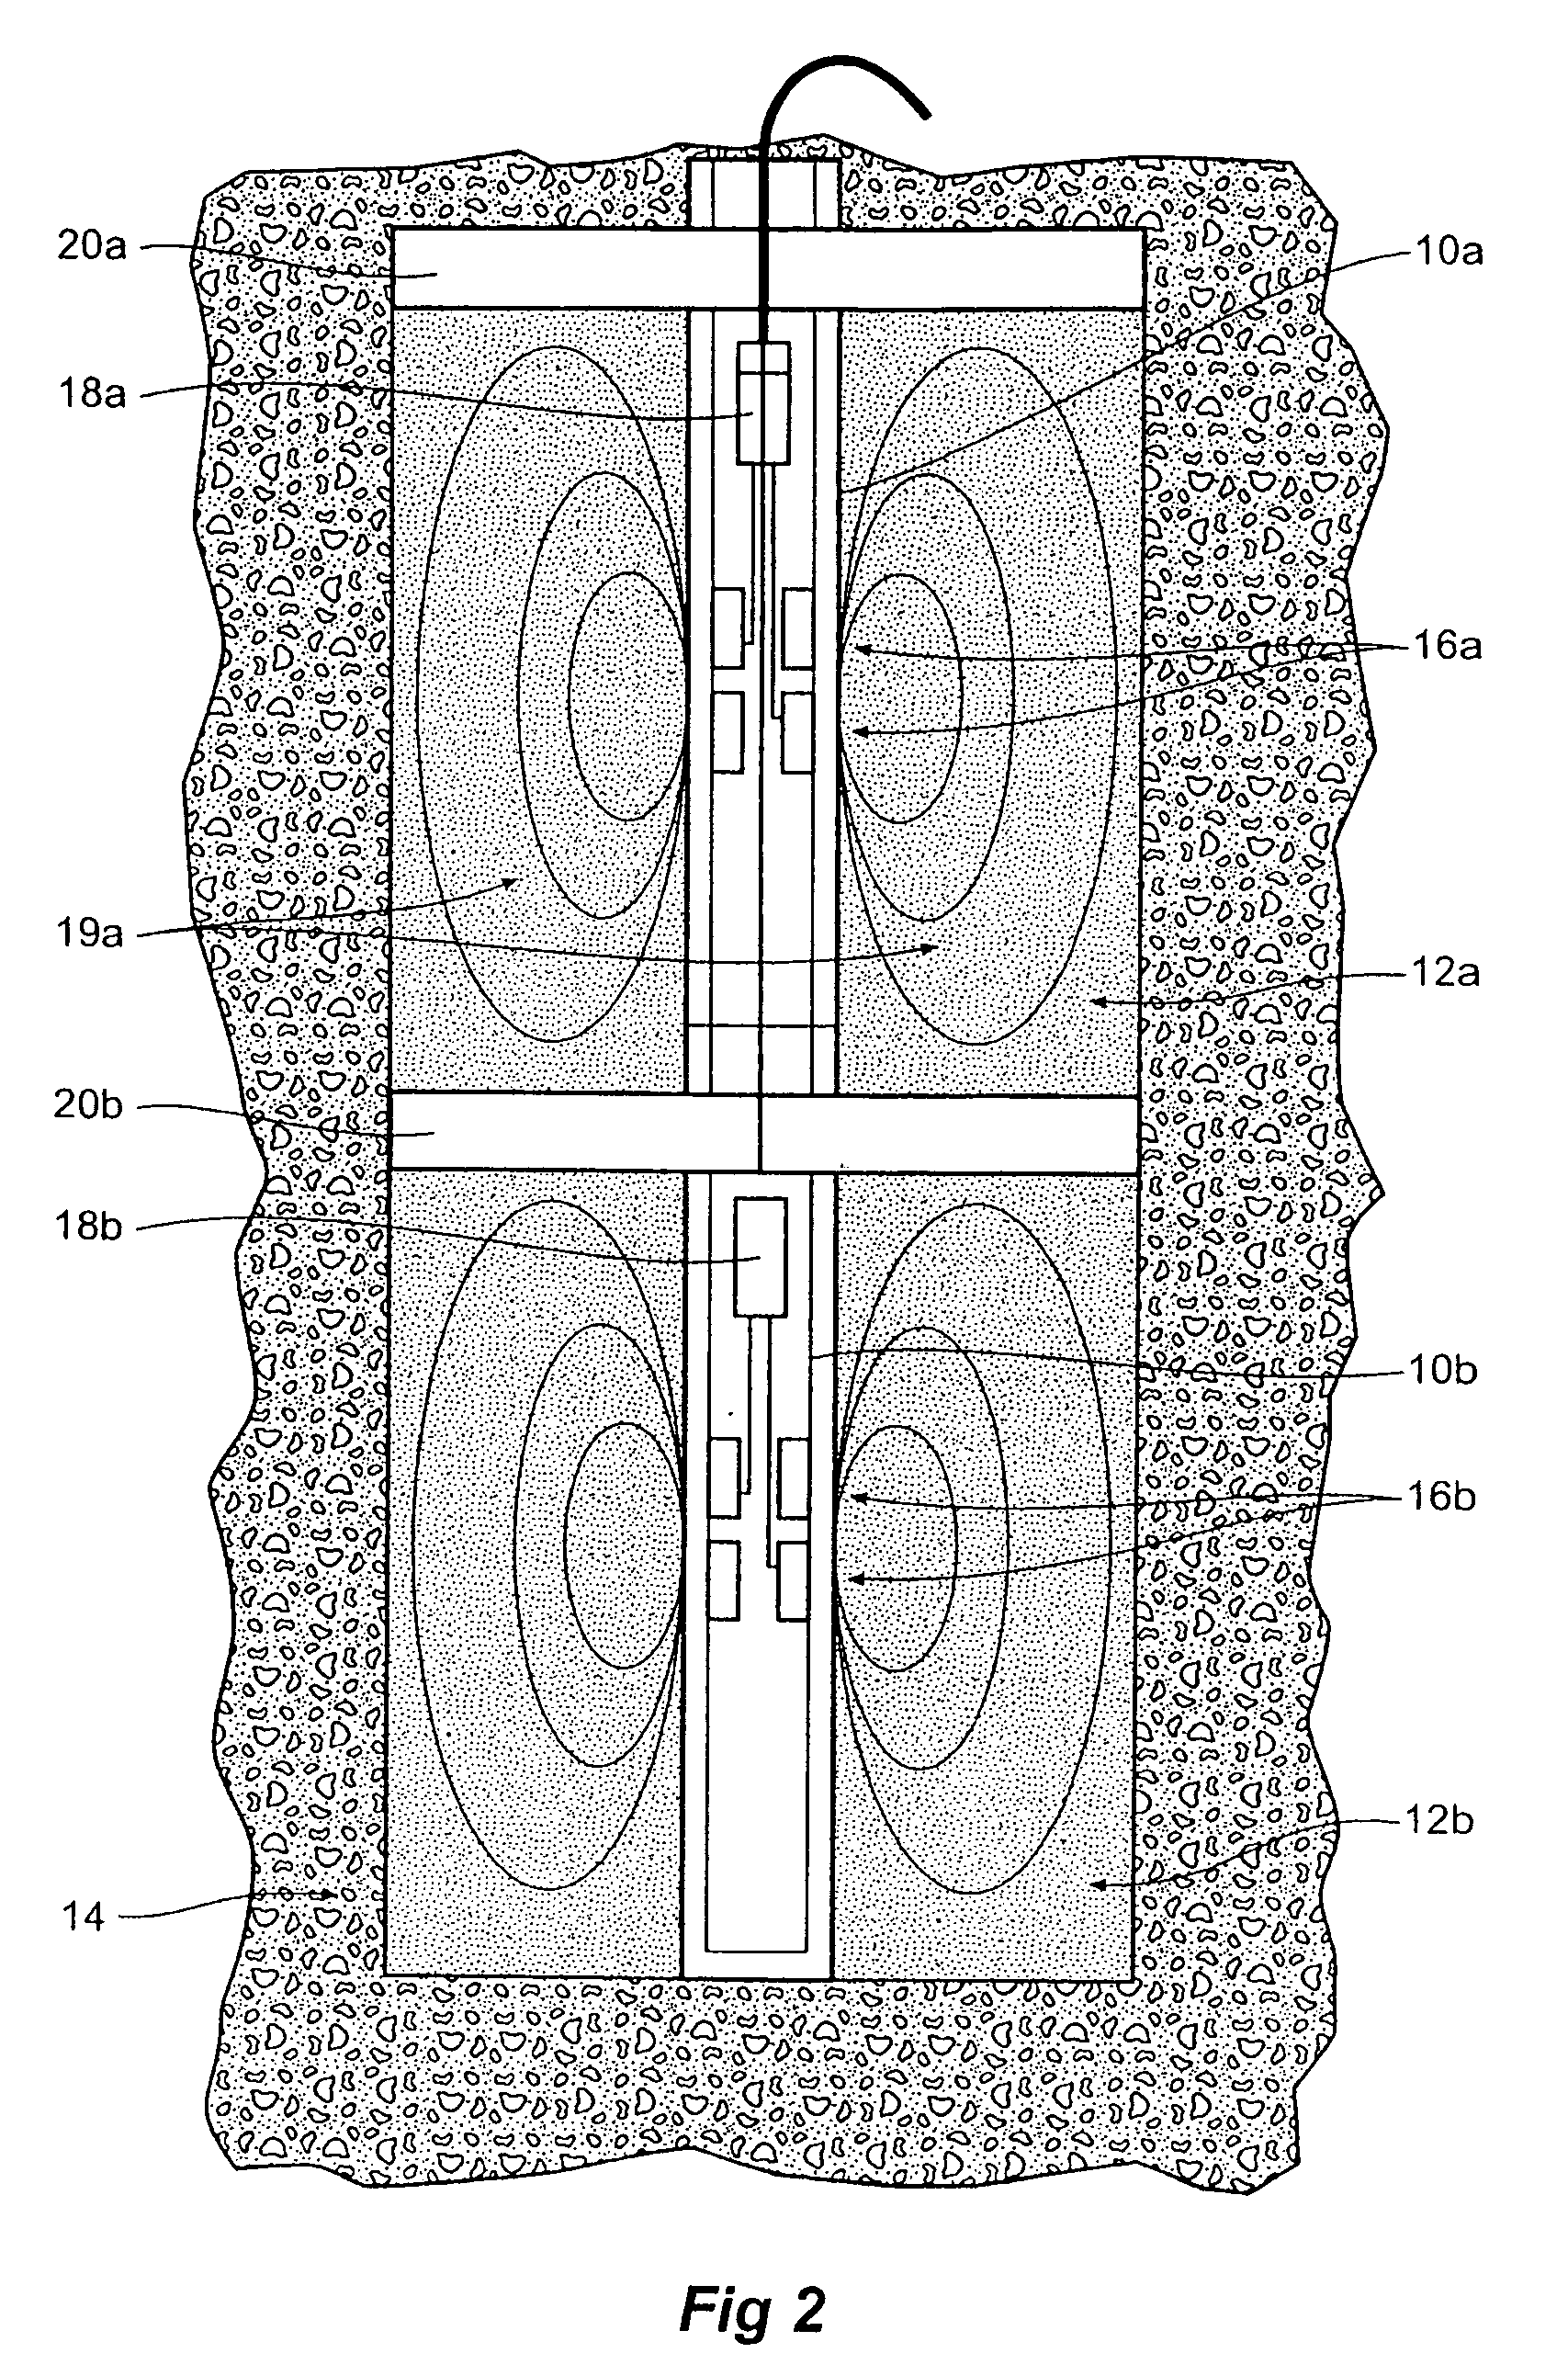 Soil matric potential and salinity measurement apparatus and method of use